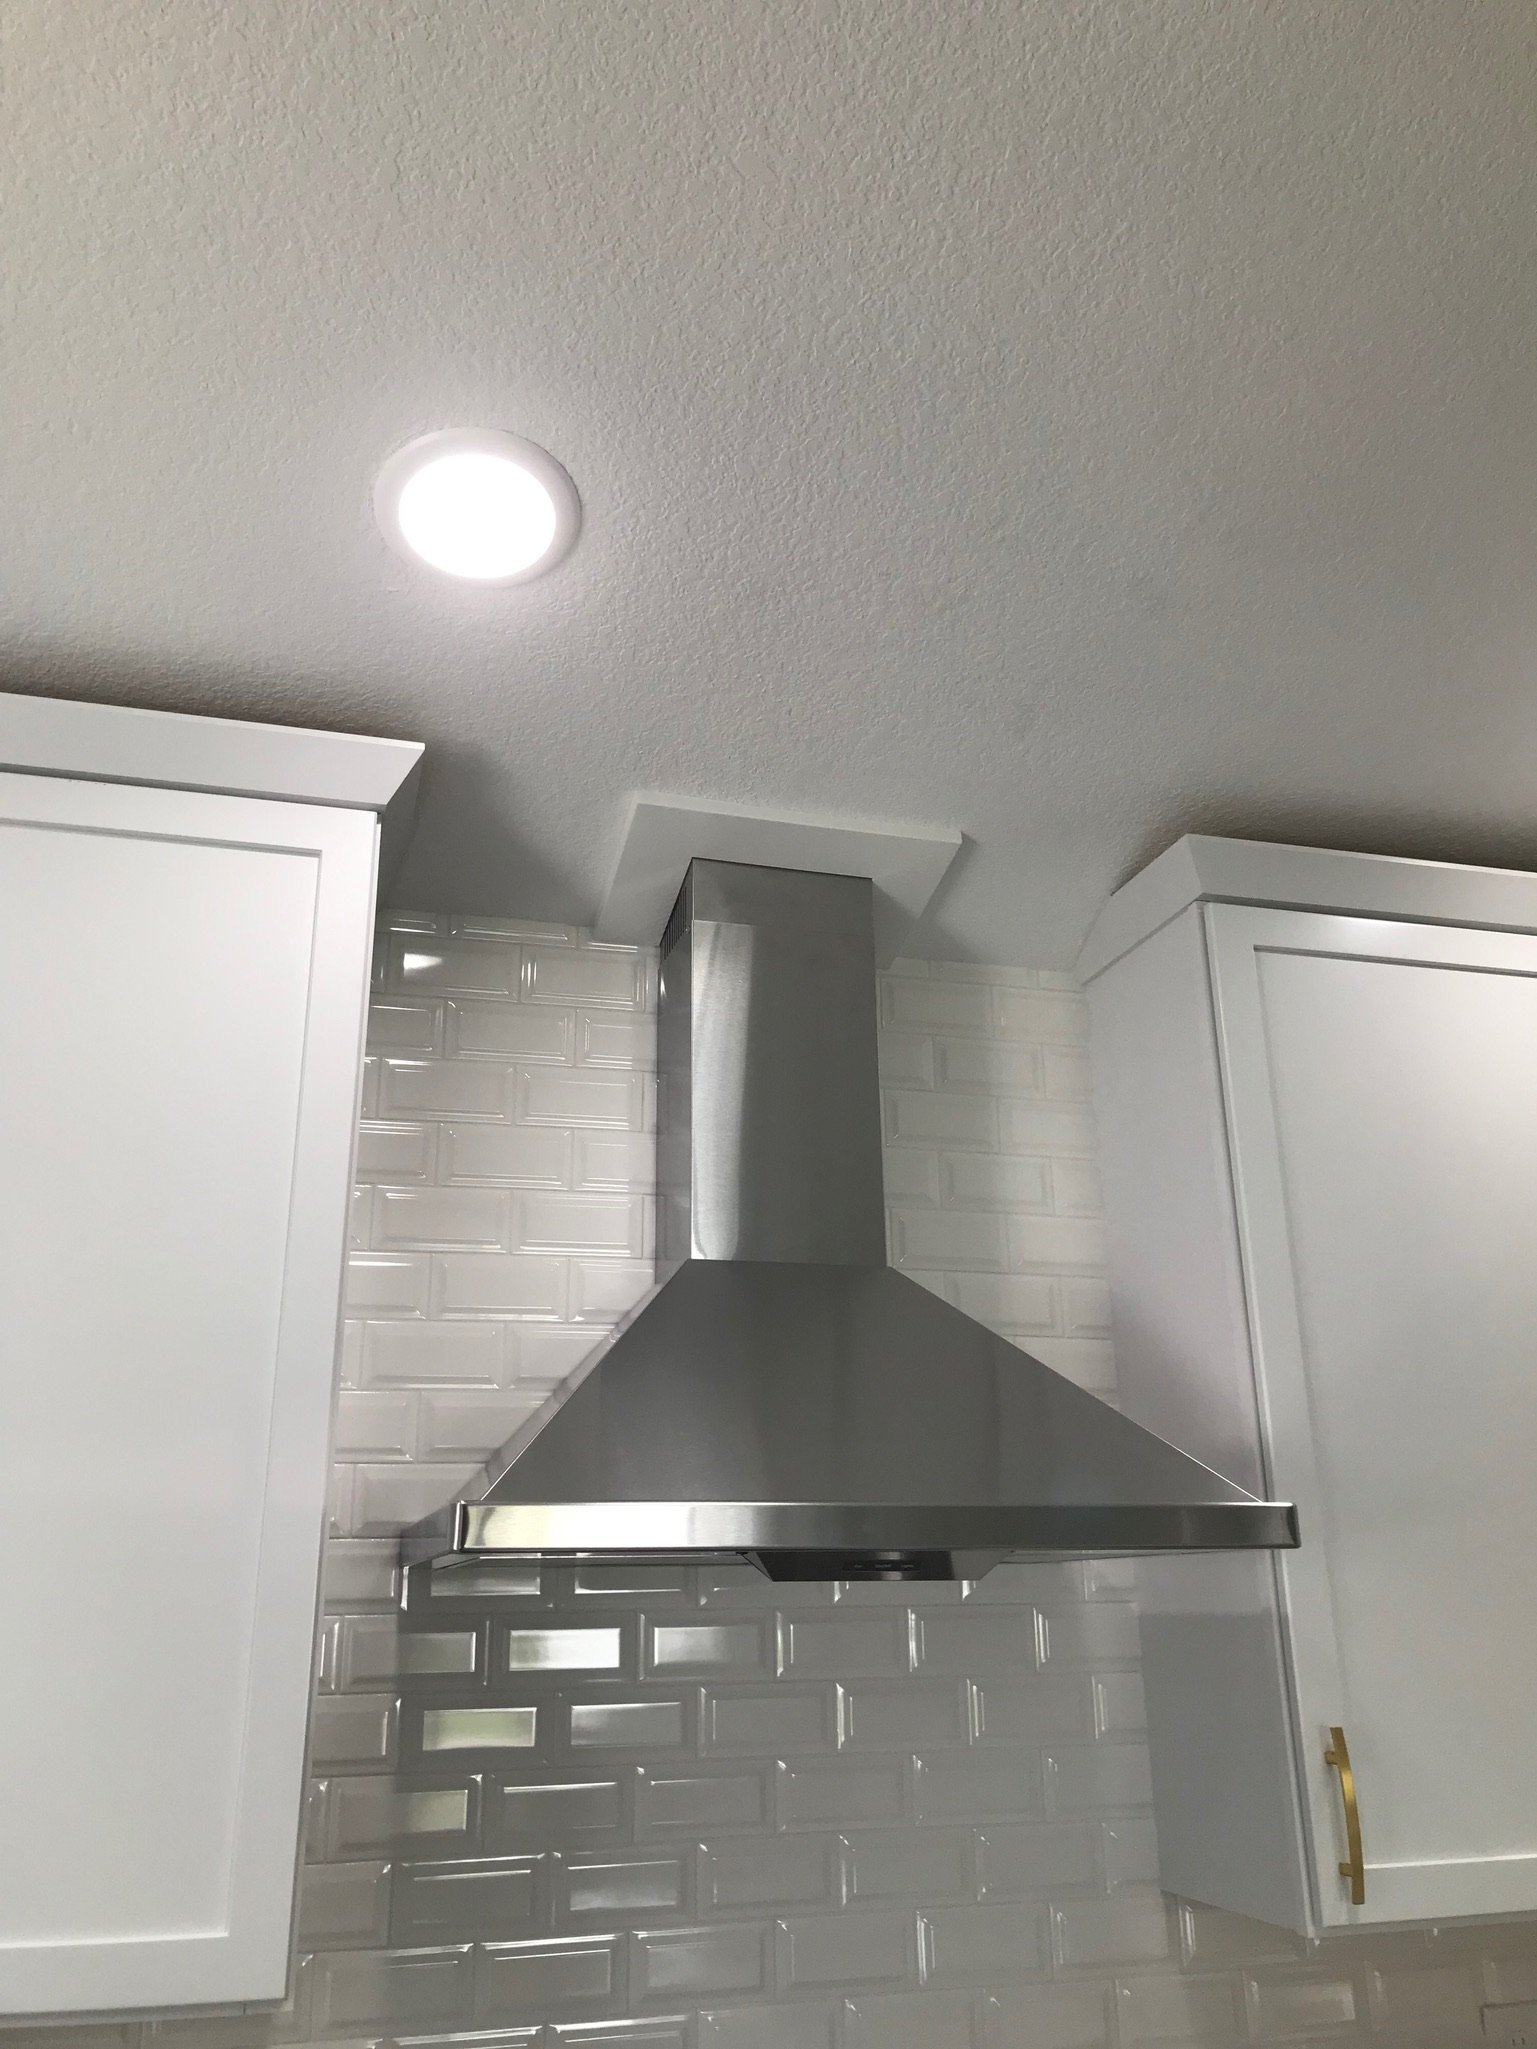 Close-up of a stainless steel range hood in kitchen